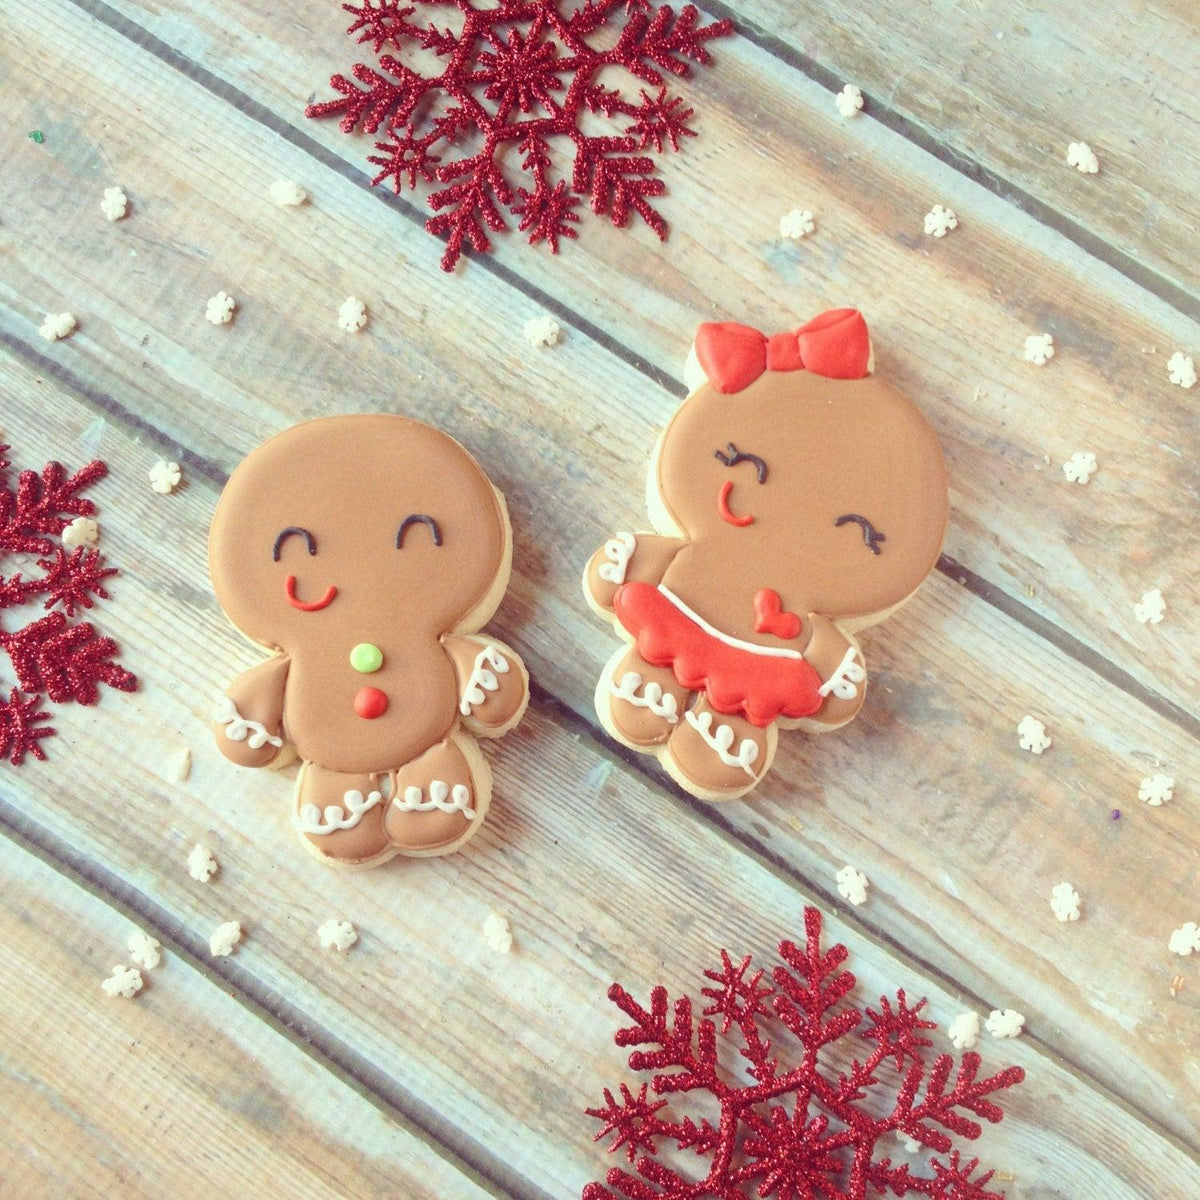 Chubby Gingerbread Cookie Cutters - Sweetleigh 